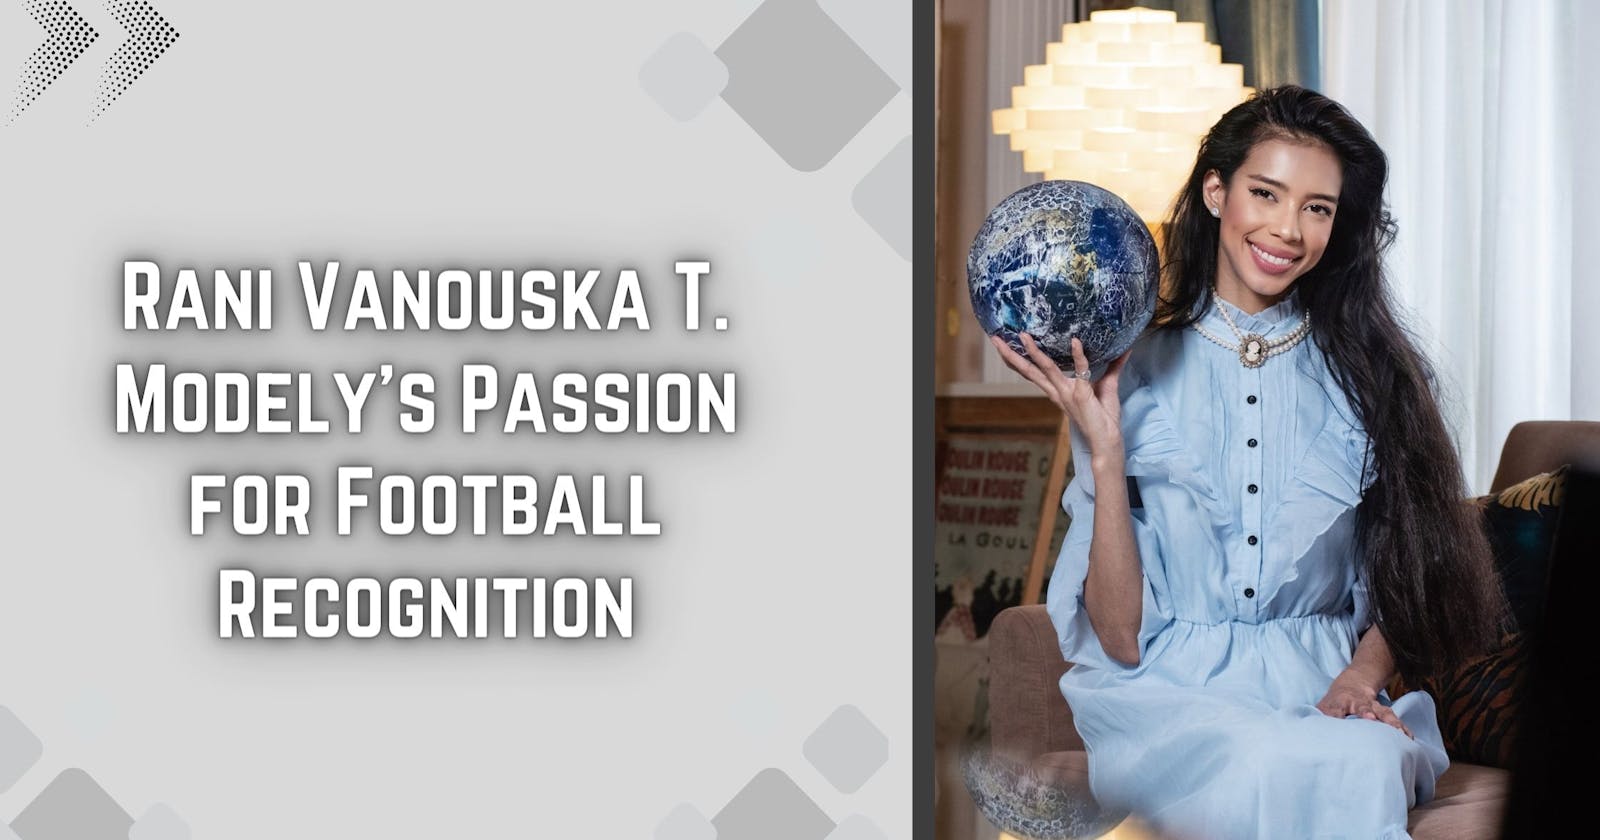 Rani Vanouska T. Modely's Passion for Football Recognition